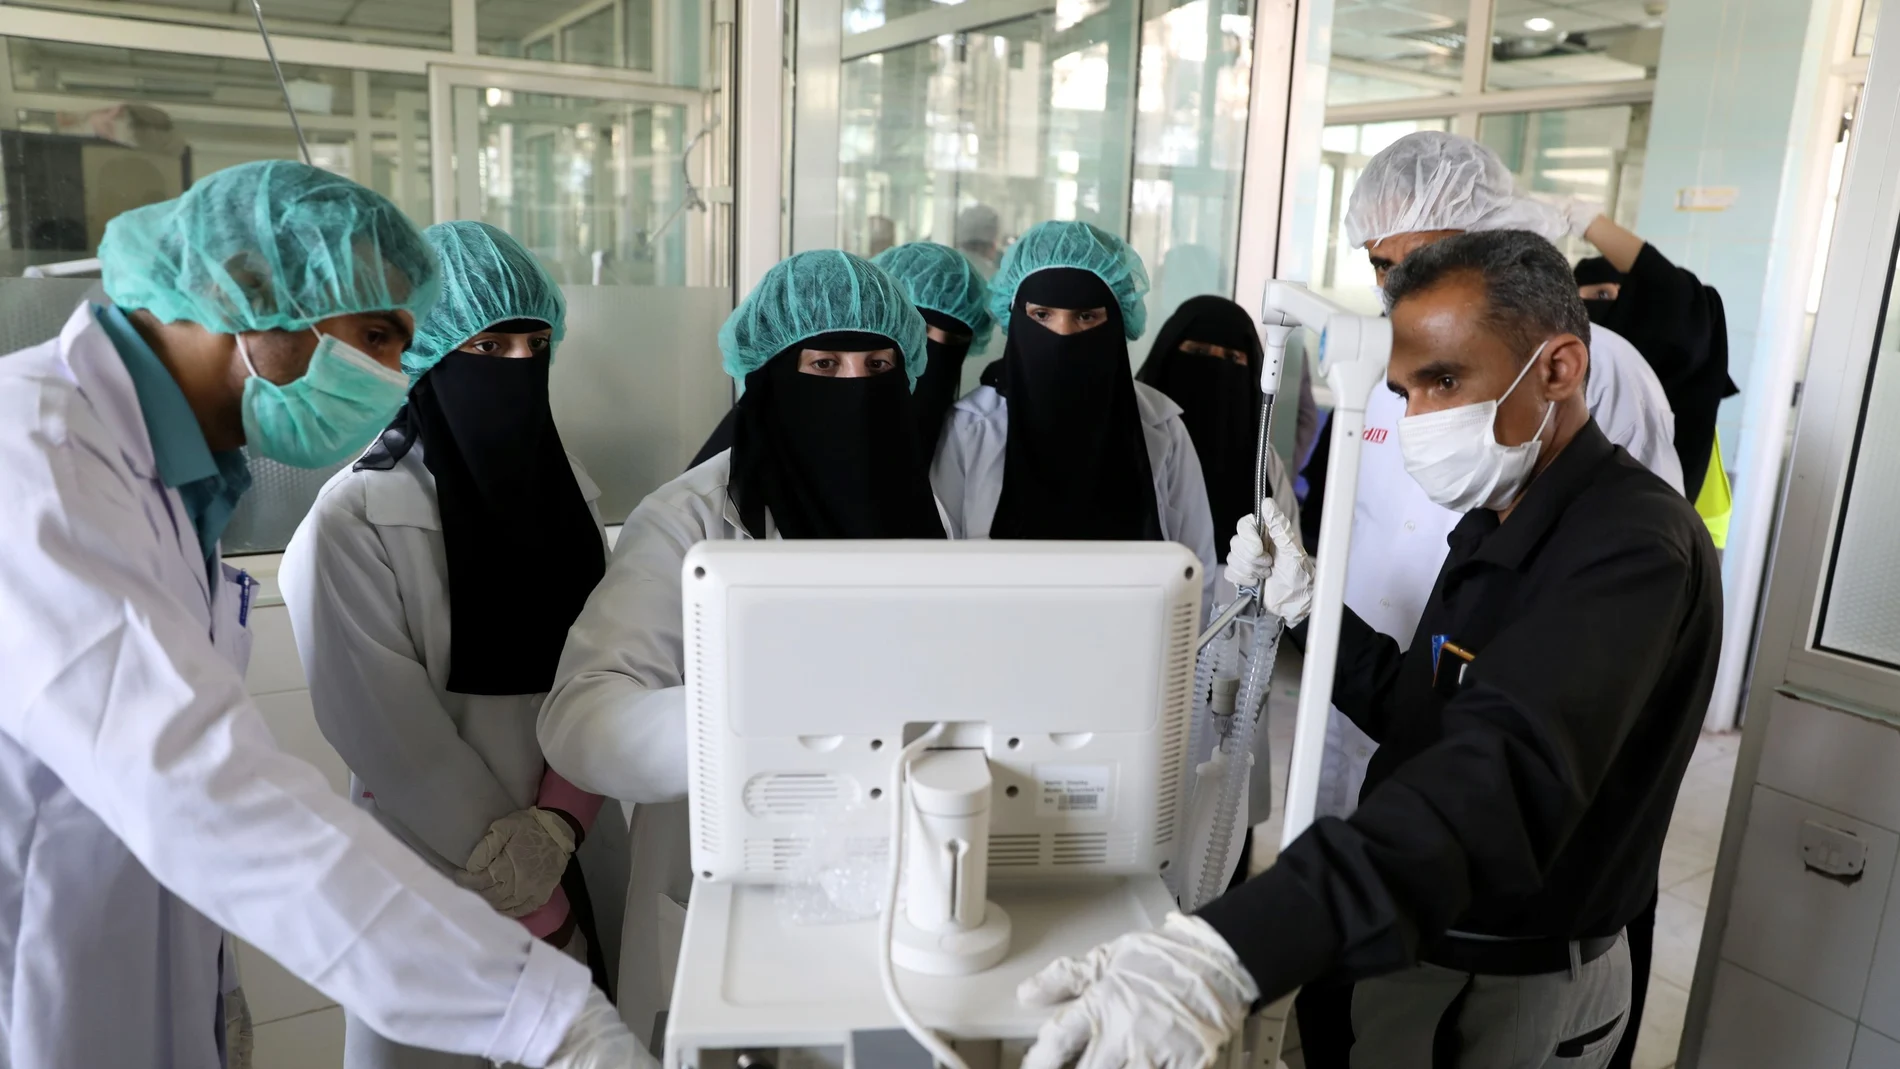 Nurses receive training on using ventilators provided by WHO in preparation for any possible spread of COVID-19 in Sanaa